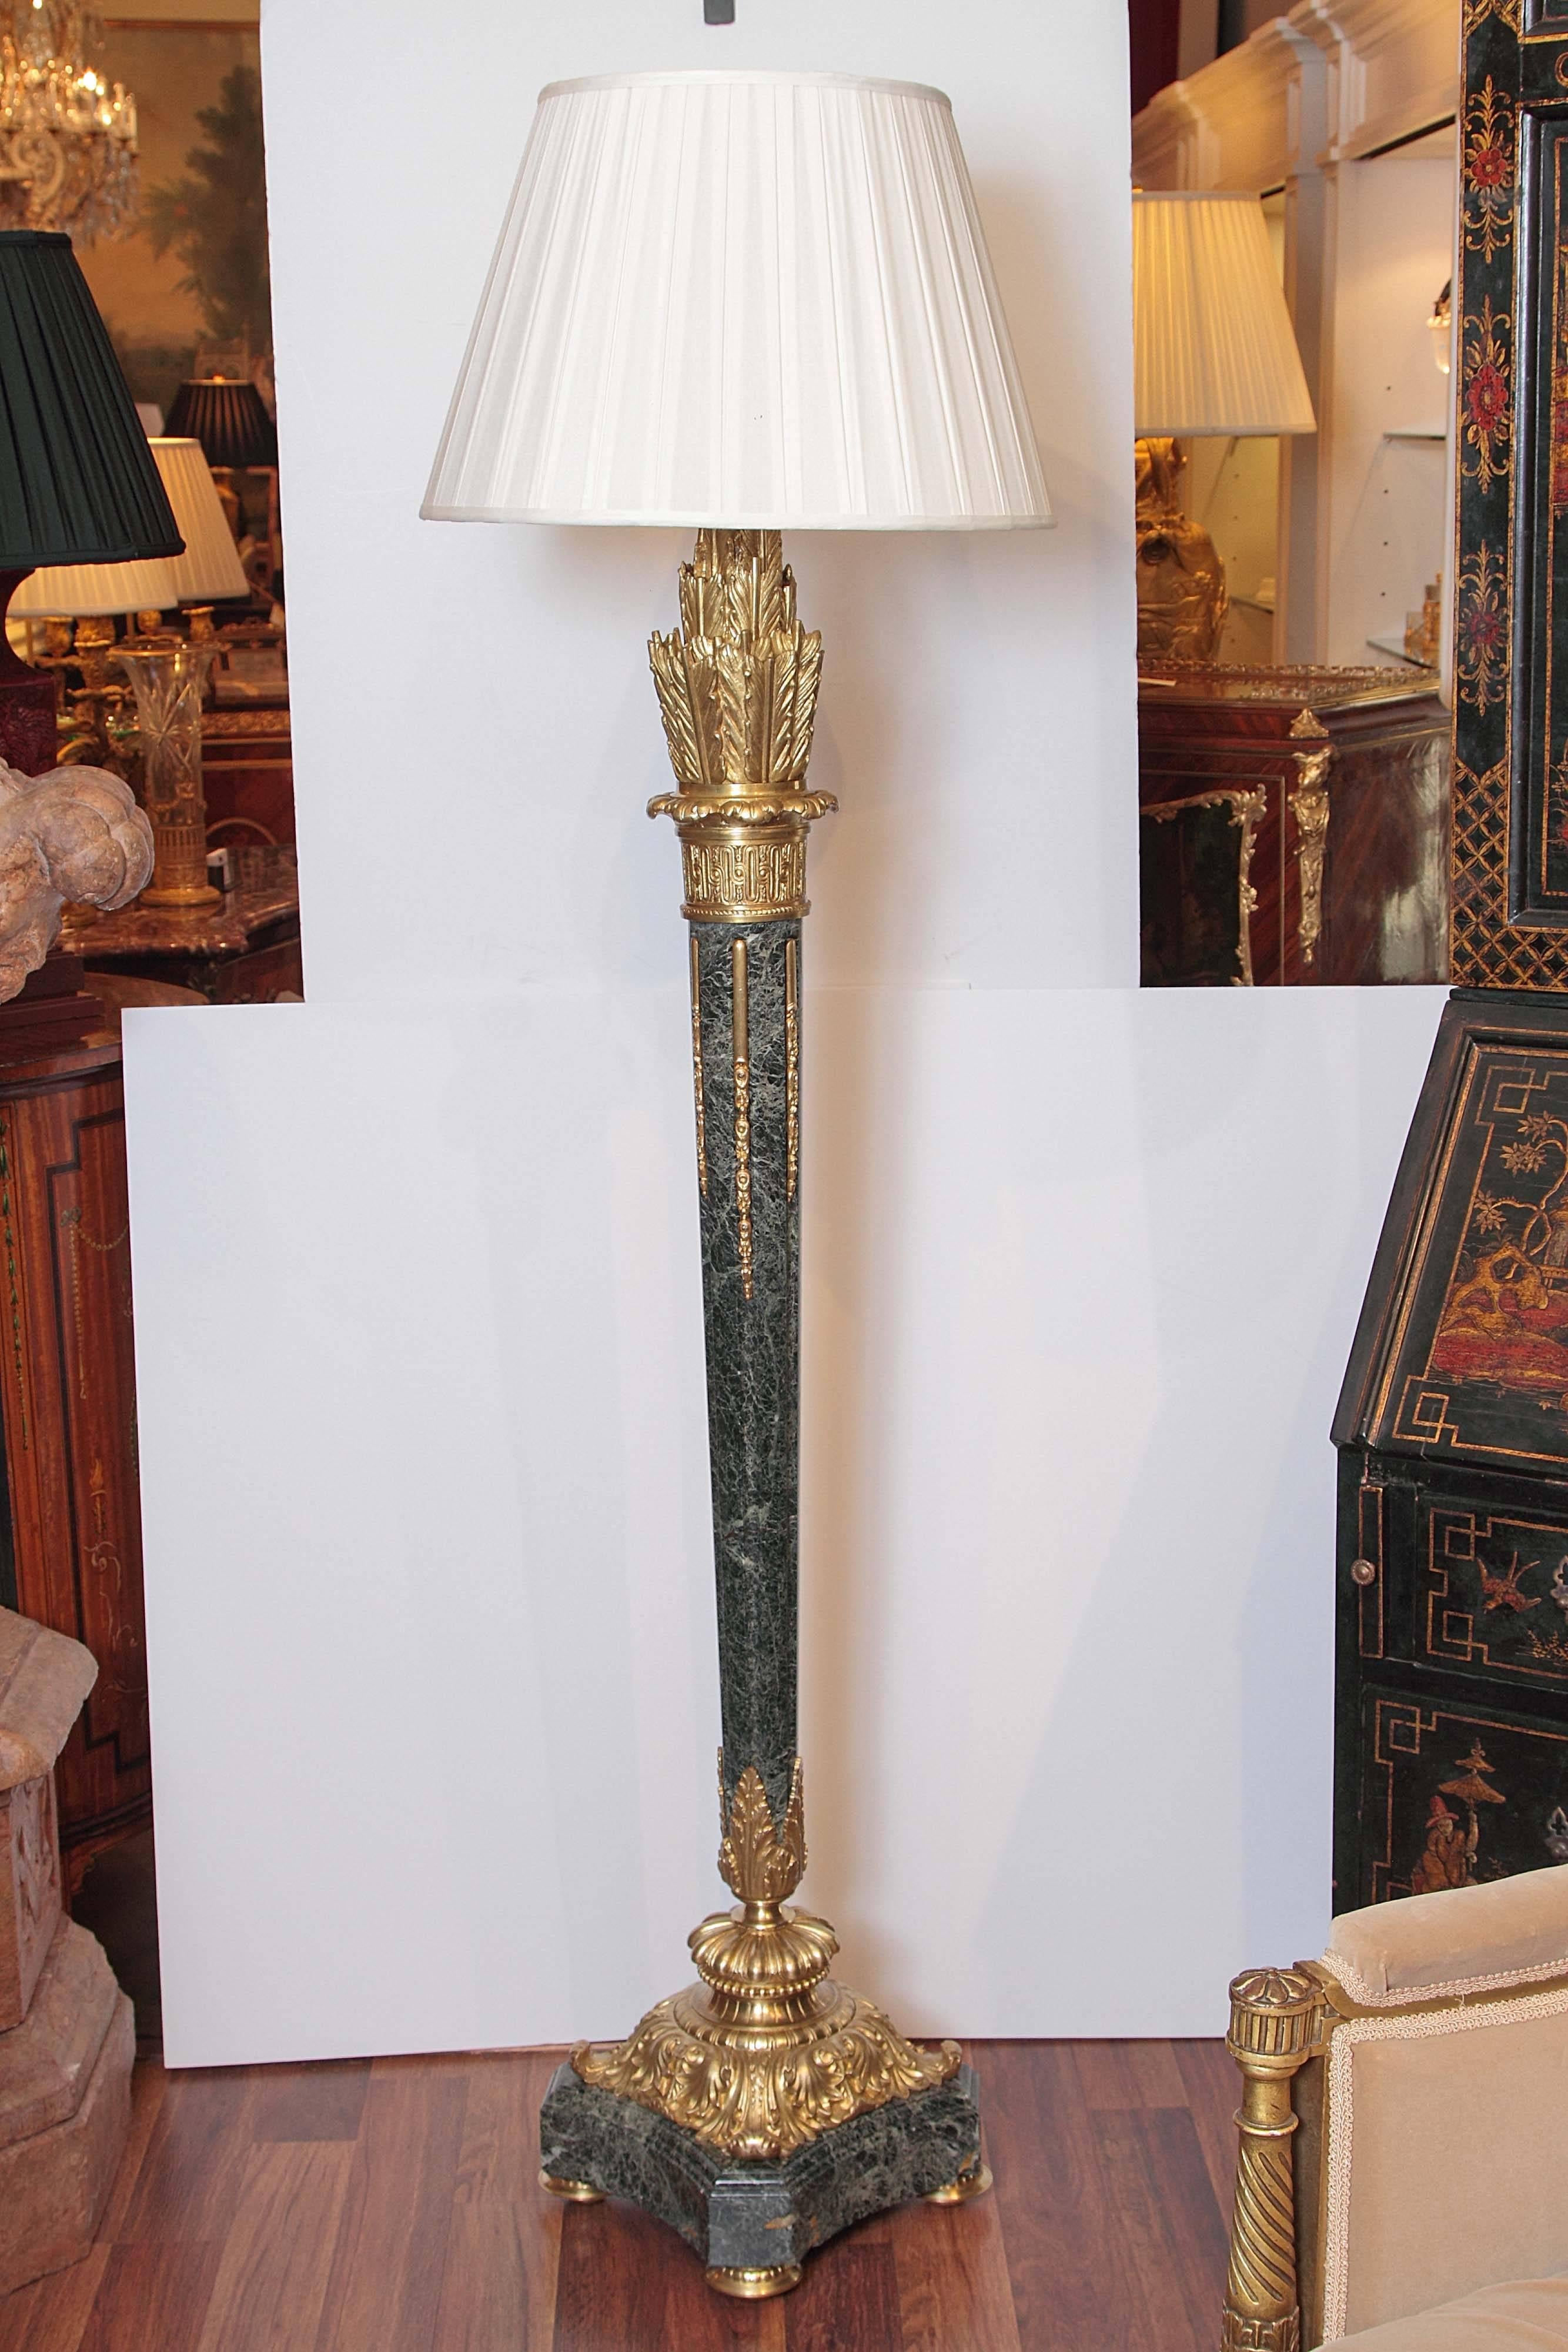 19th century very fine French Empire marble and gilt bronze floor lamp. Linke quality.